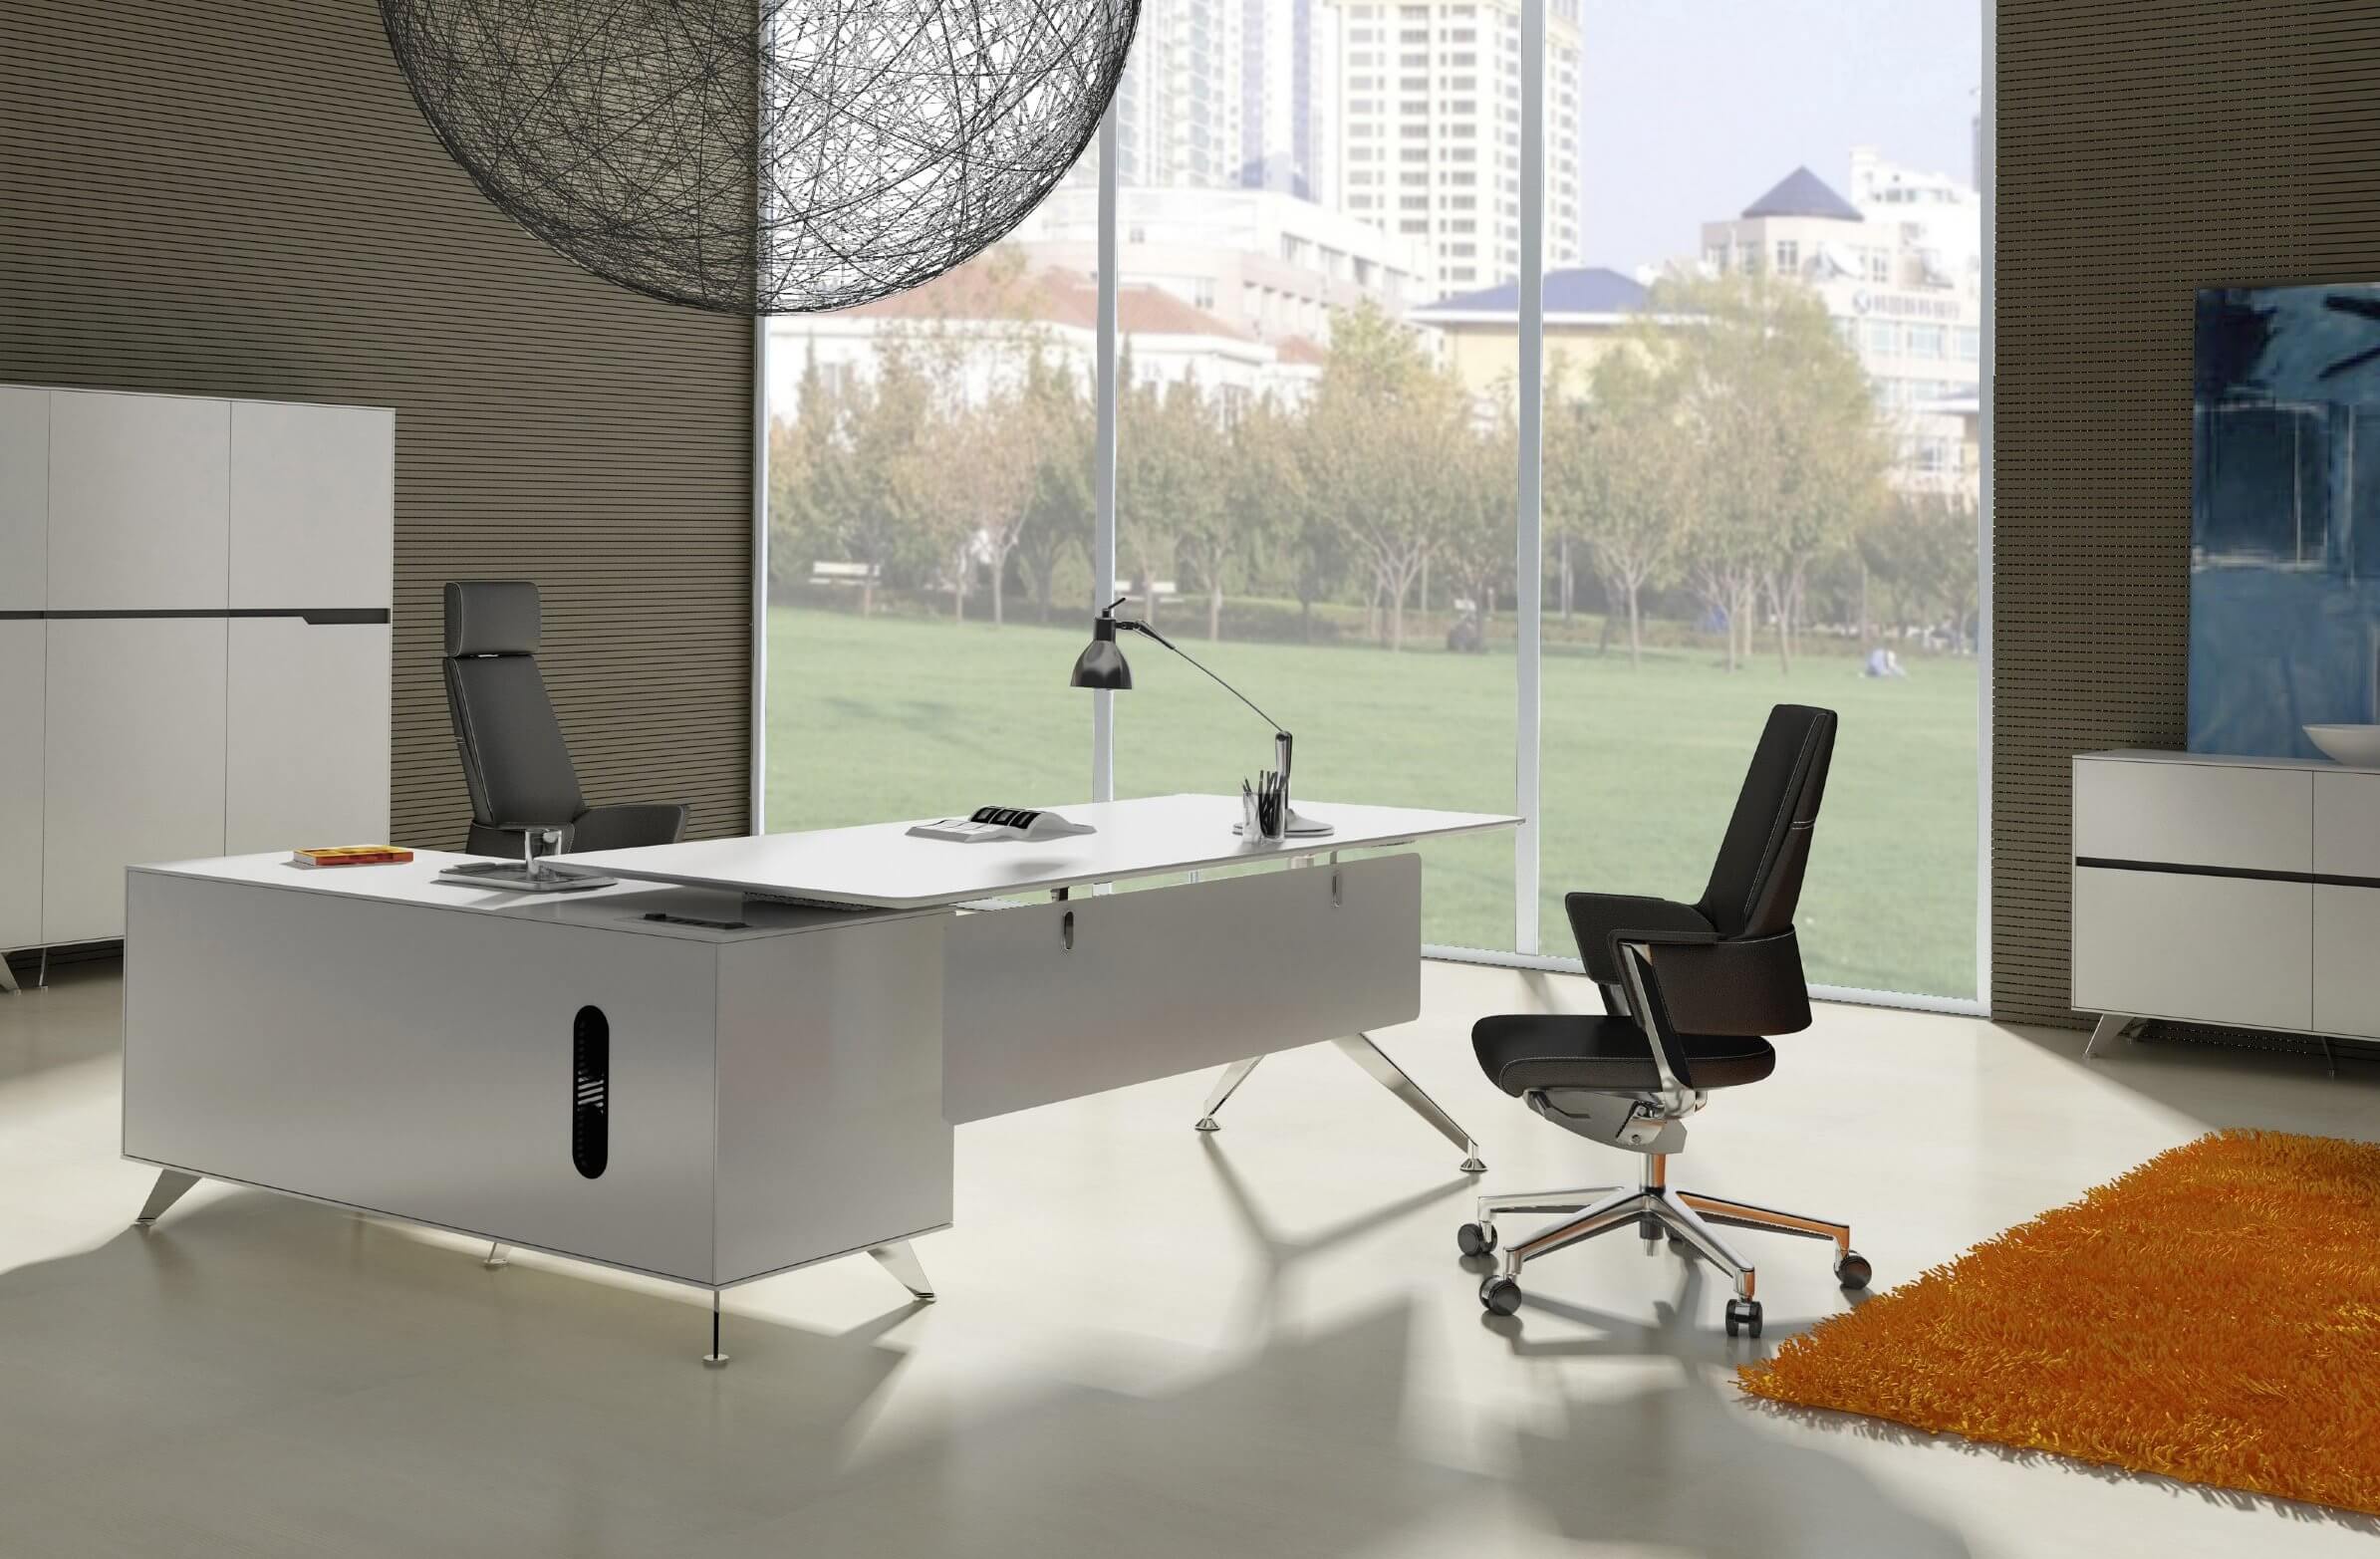 30 Different Types of Desks for Every Conceivable Layout